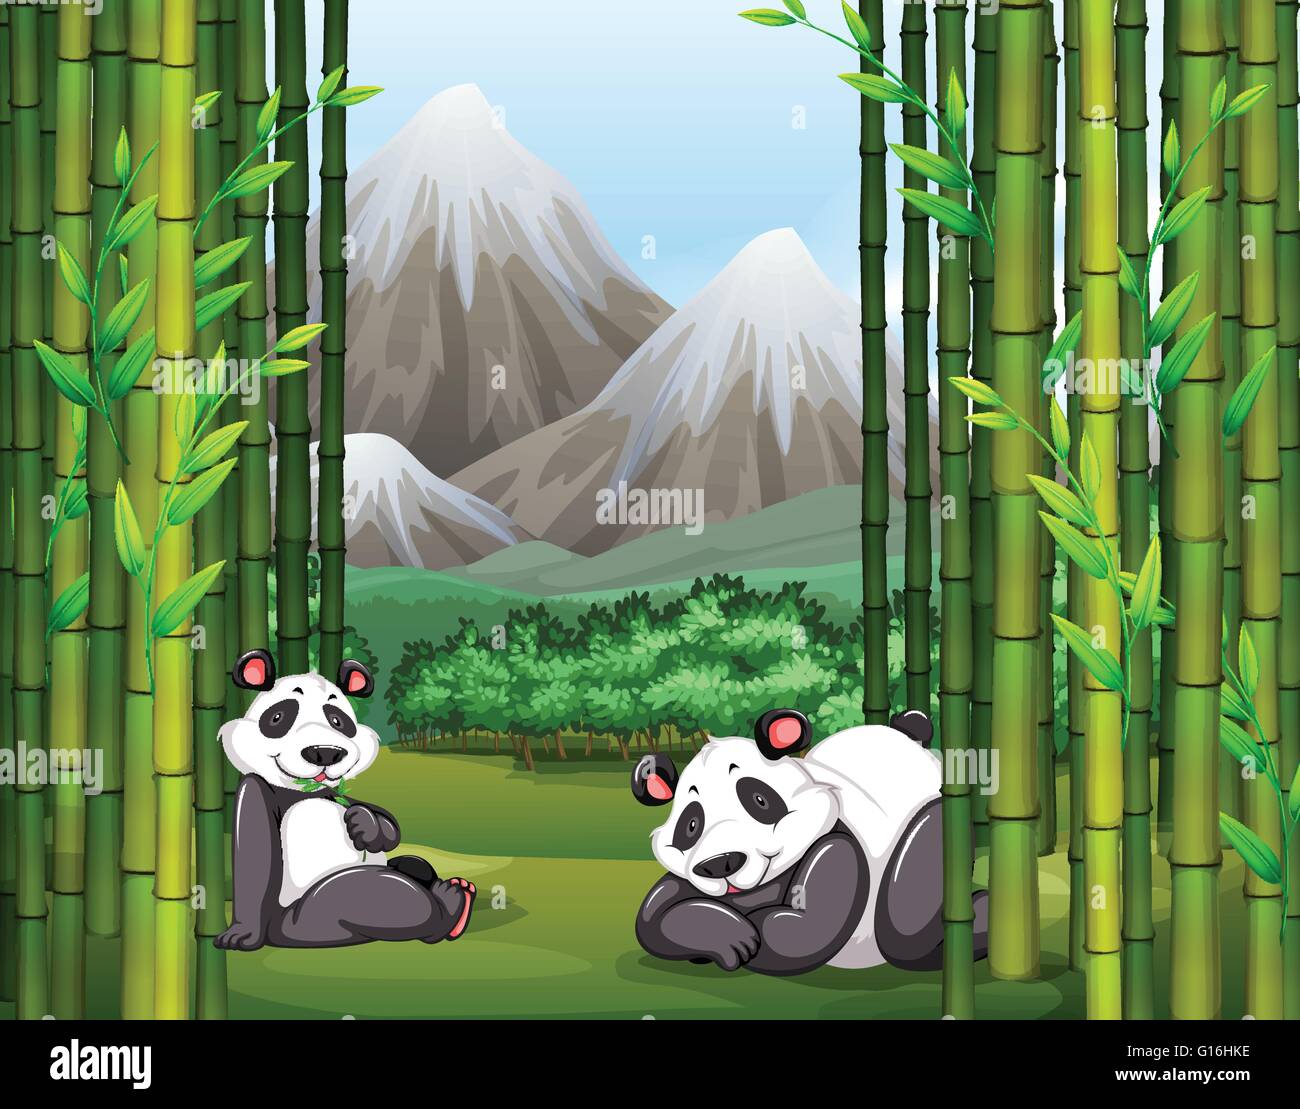 Pandas And Bamboo Forest Illustration Stock Vector Image Art Alamy